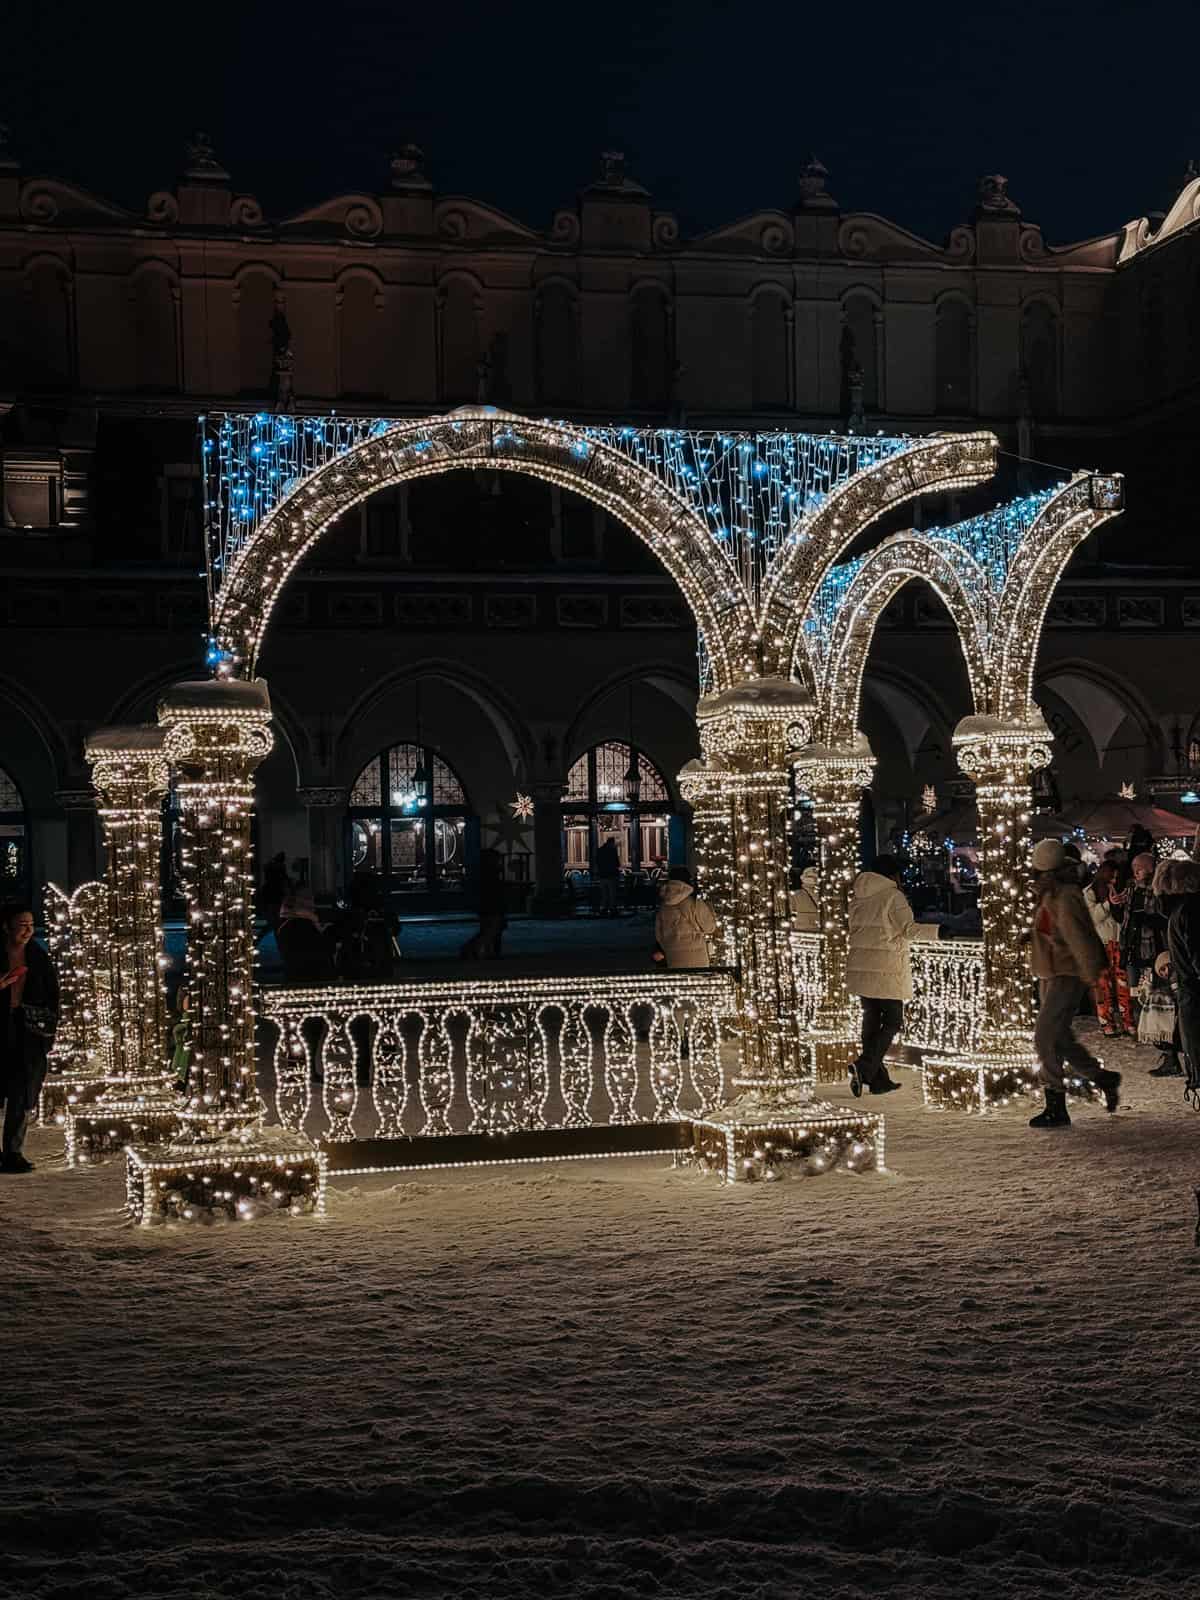 A festive, illuminated archway adorned with blue and white lights creating a gateway, surrounded by snow-covered ground at a night-time Christmas market, with people milling about and historic buildings in the background.